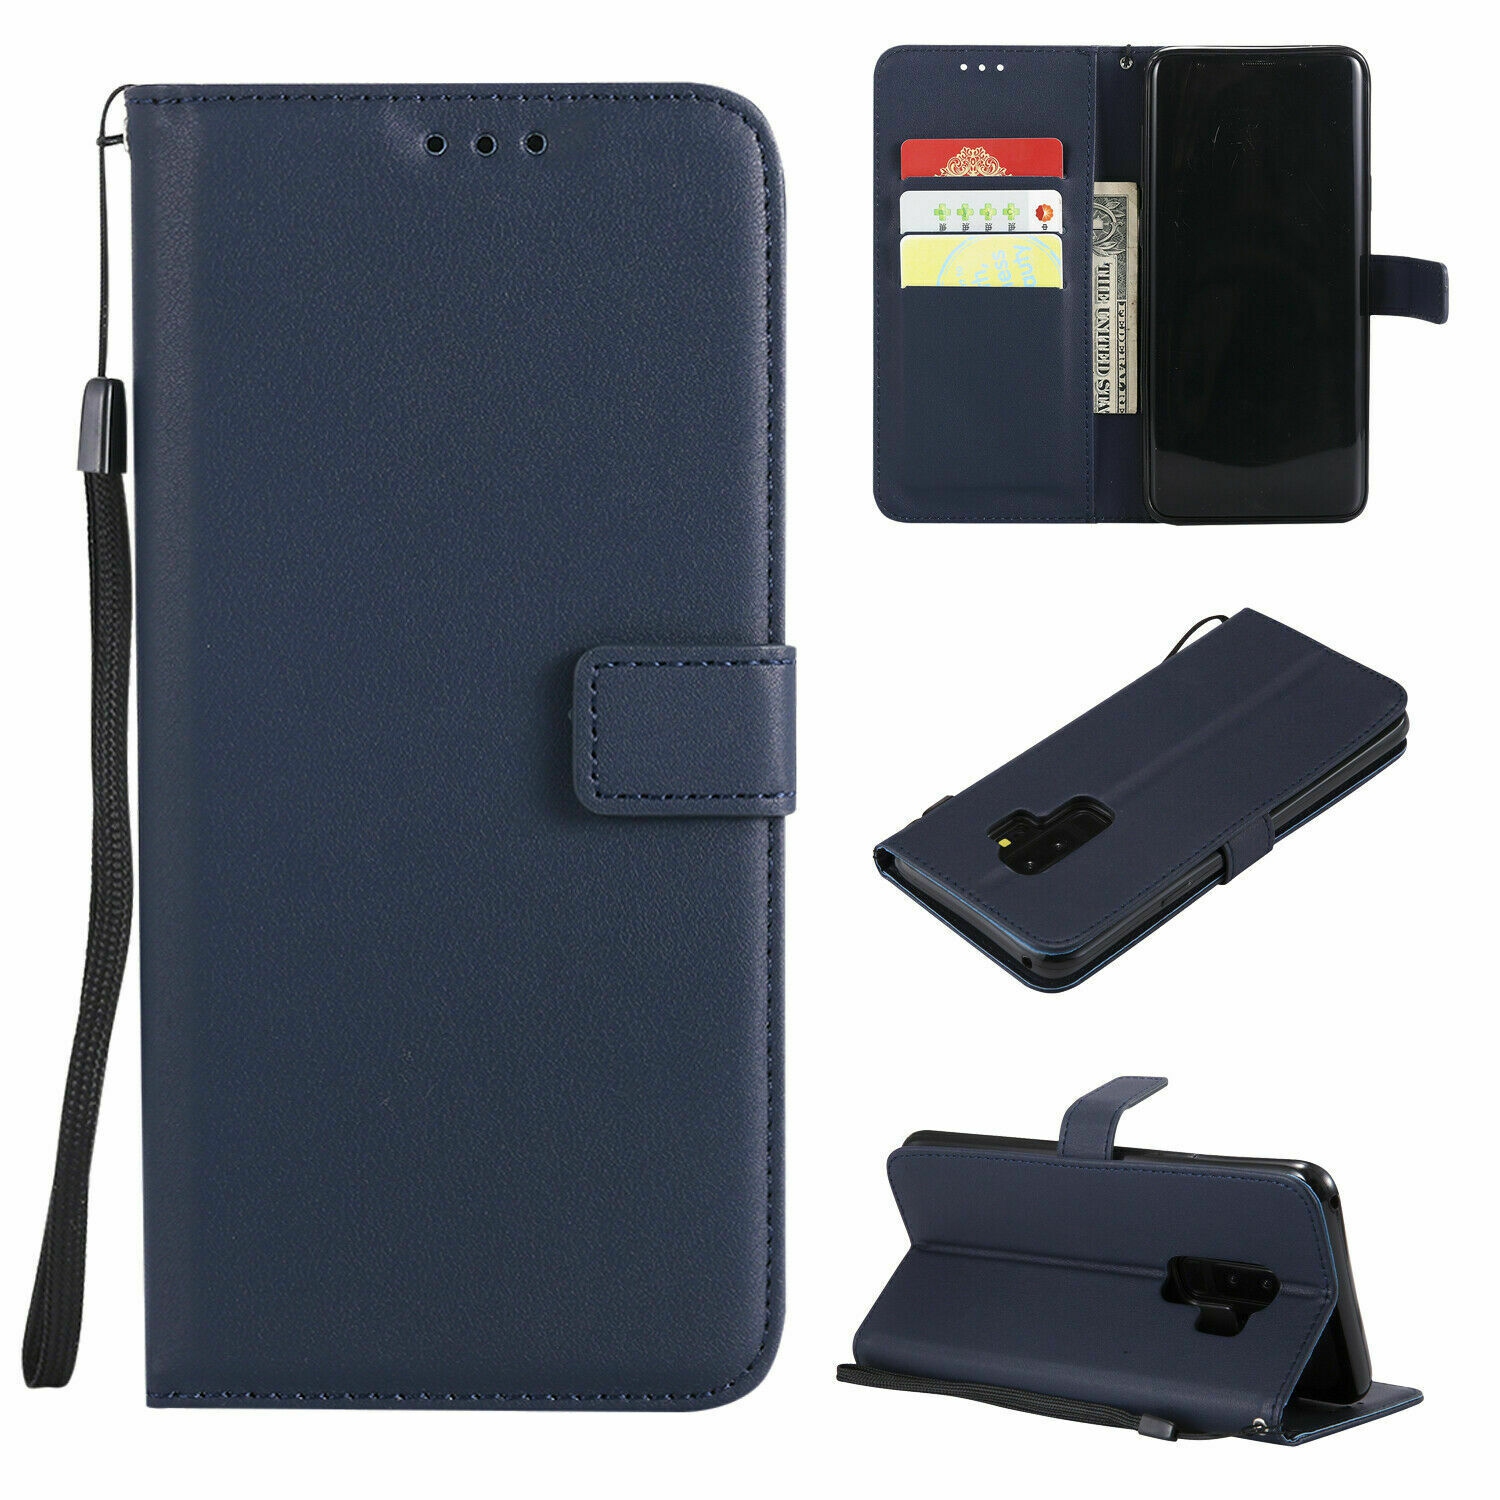 【CSmart】 Magnetic Card Slot Leather Folio Wallet Flip Case Cover for Samsung Galaxy S9 Plus, Navy